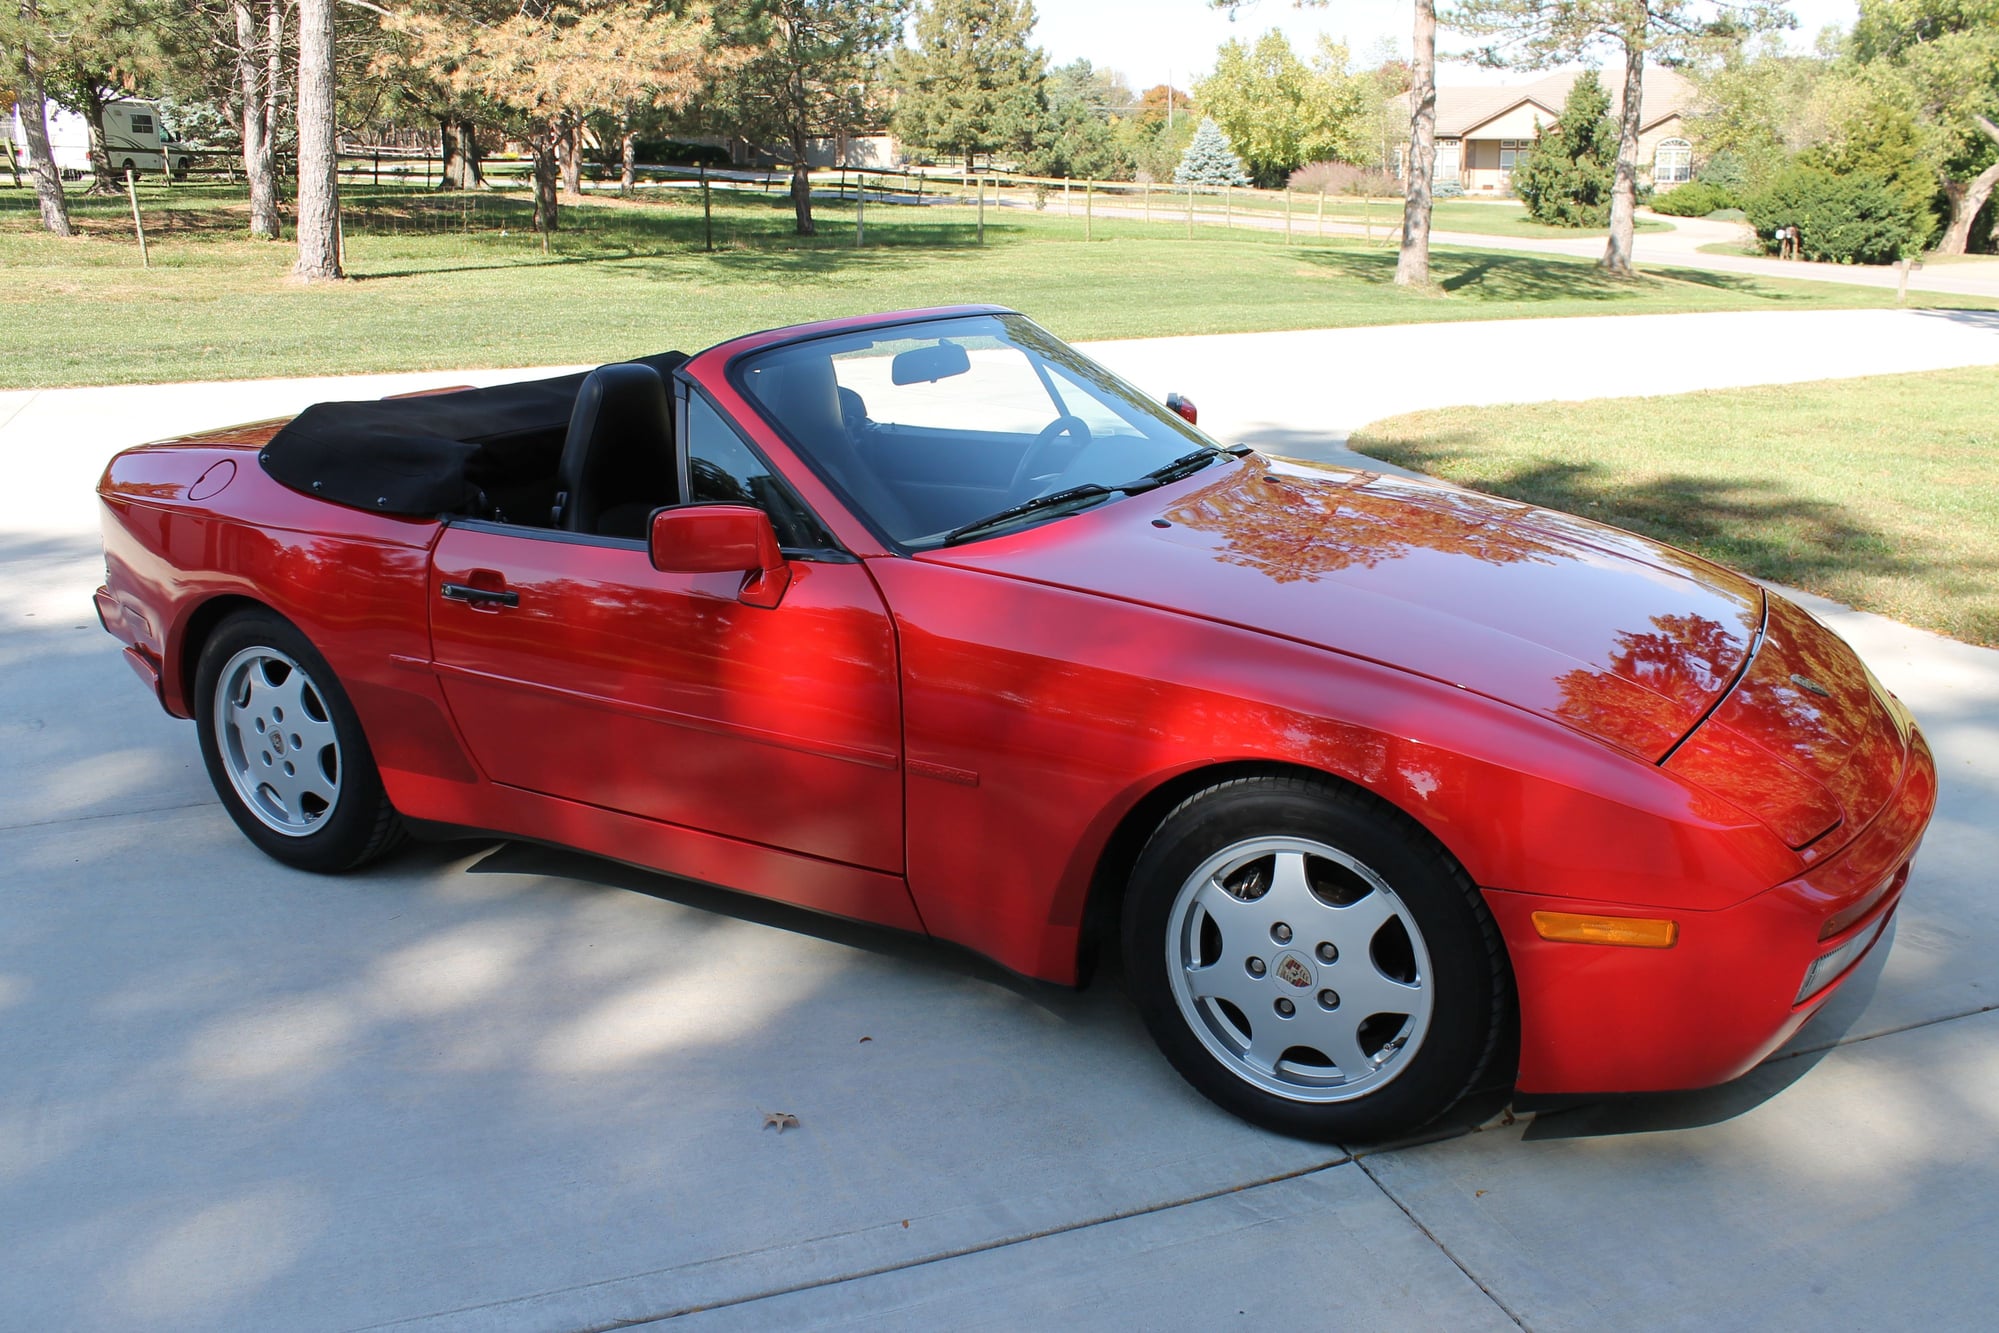 1991 Porsche 944 - 1991 Porsche 944S2 Cabriolet - Used - VIN WP0CB2947MN440315 - 96,200 Miles - 4 cyl - 2WD - Manual - Convertible - Red - Olathe, KS 66062, United States